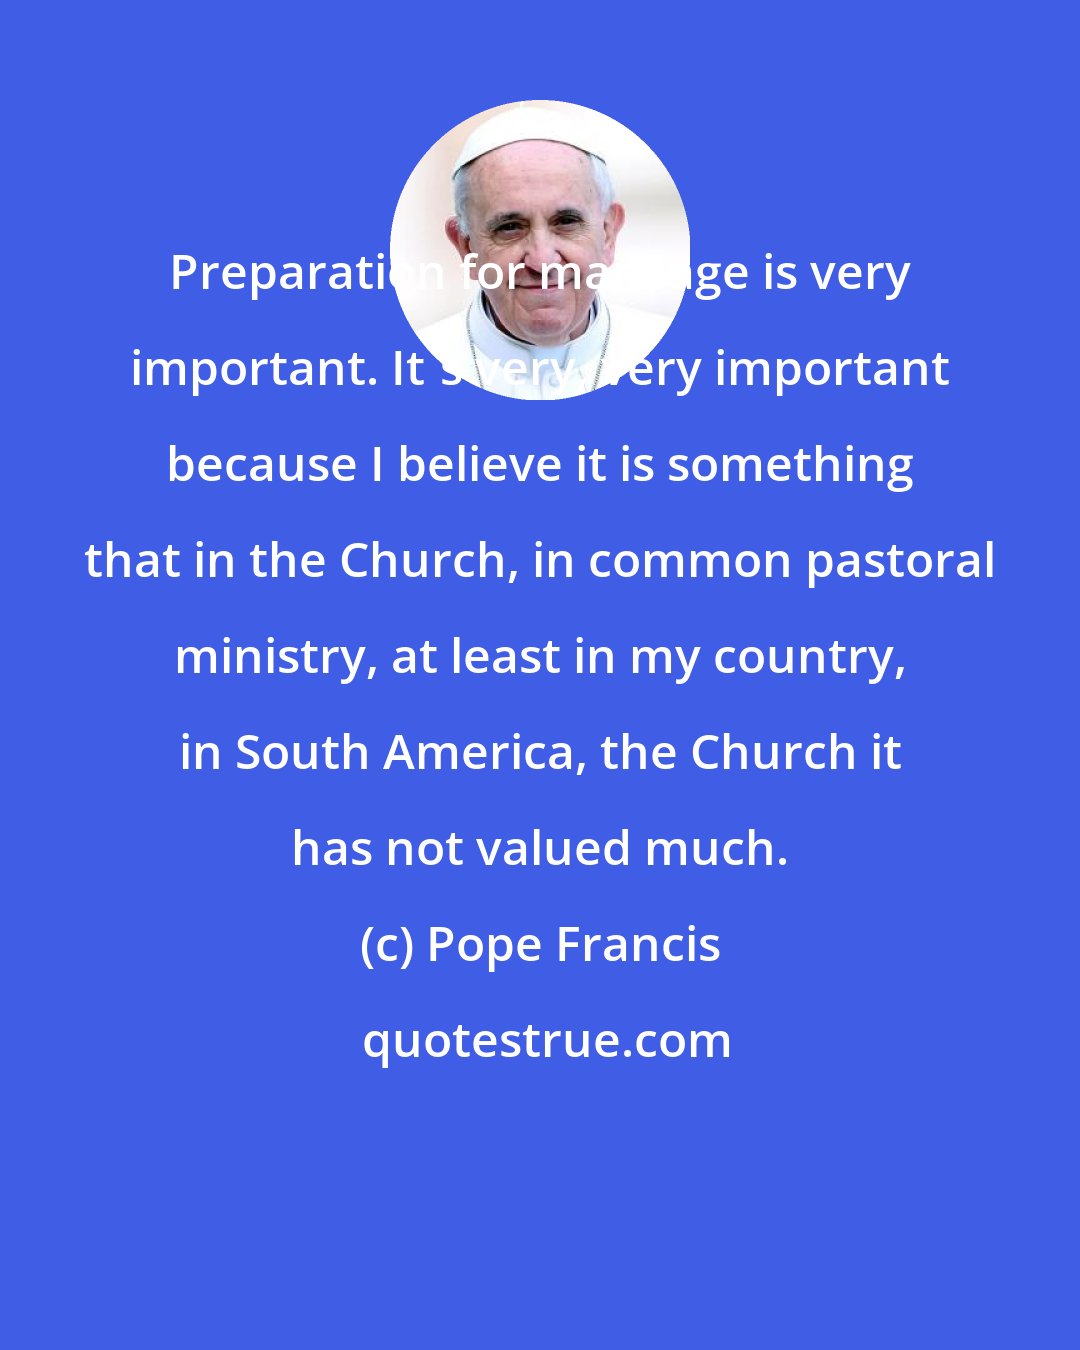 Pope Francis: Preparation for marriage is very important. It's very, very important because I believe it is something that in the Church, in common pastoral ministry, at least in my country, in South America, the Church it has not valued much.